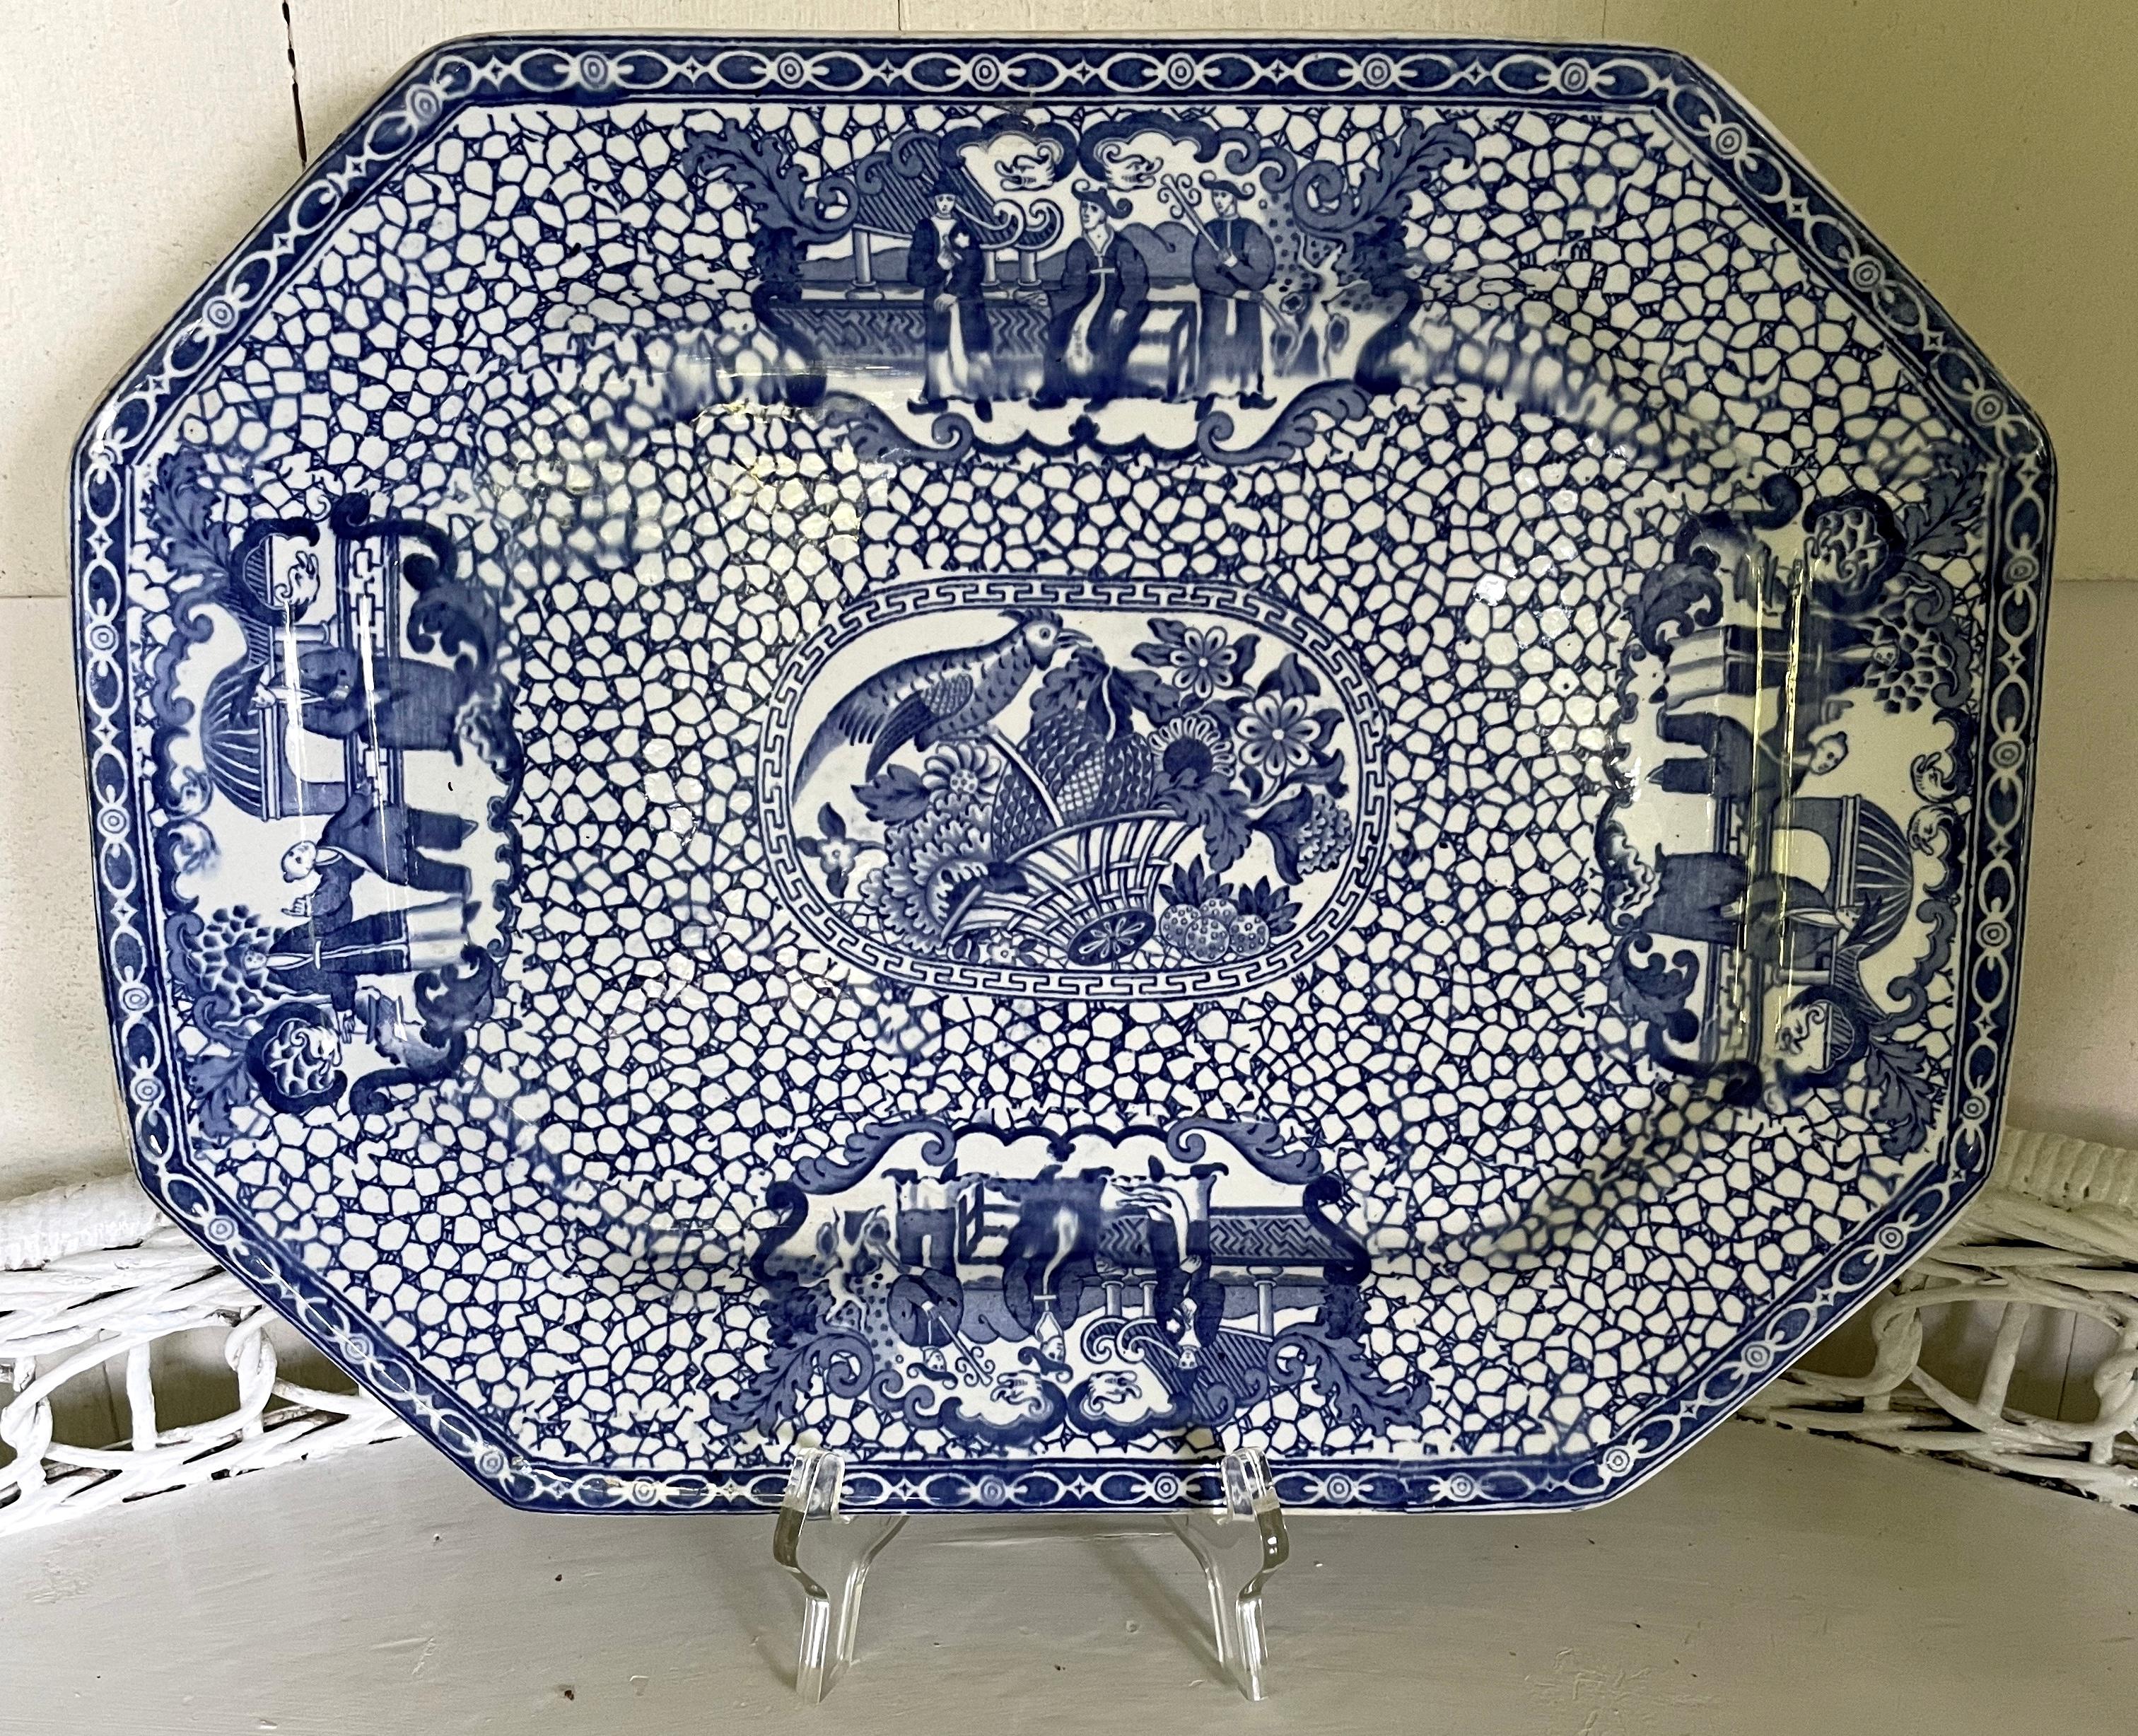 Early 20th c. English blue and white ironstone platter. Blue underglaze pattern markings for Wm Adams. Impressed marks 